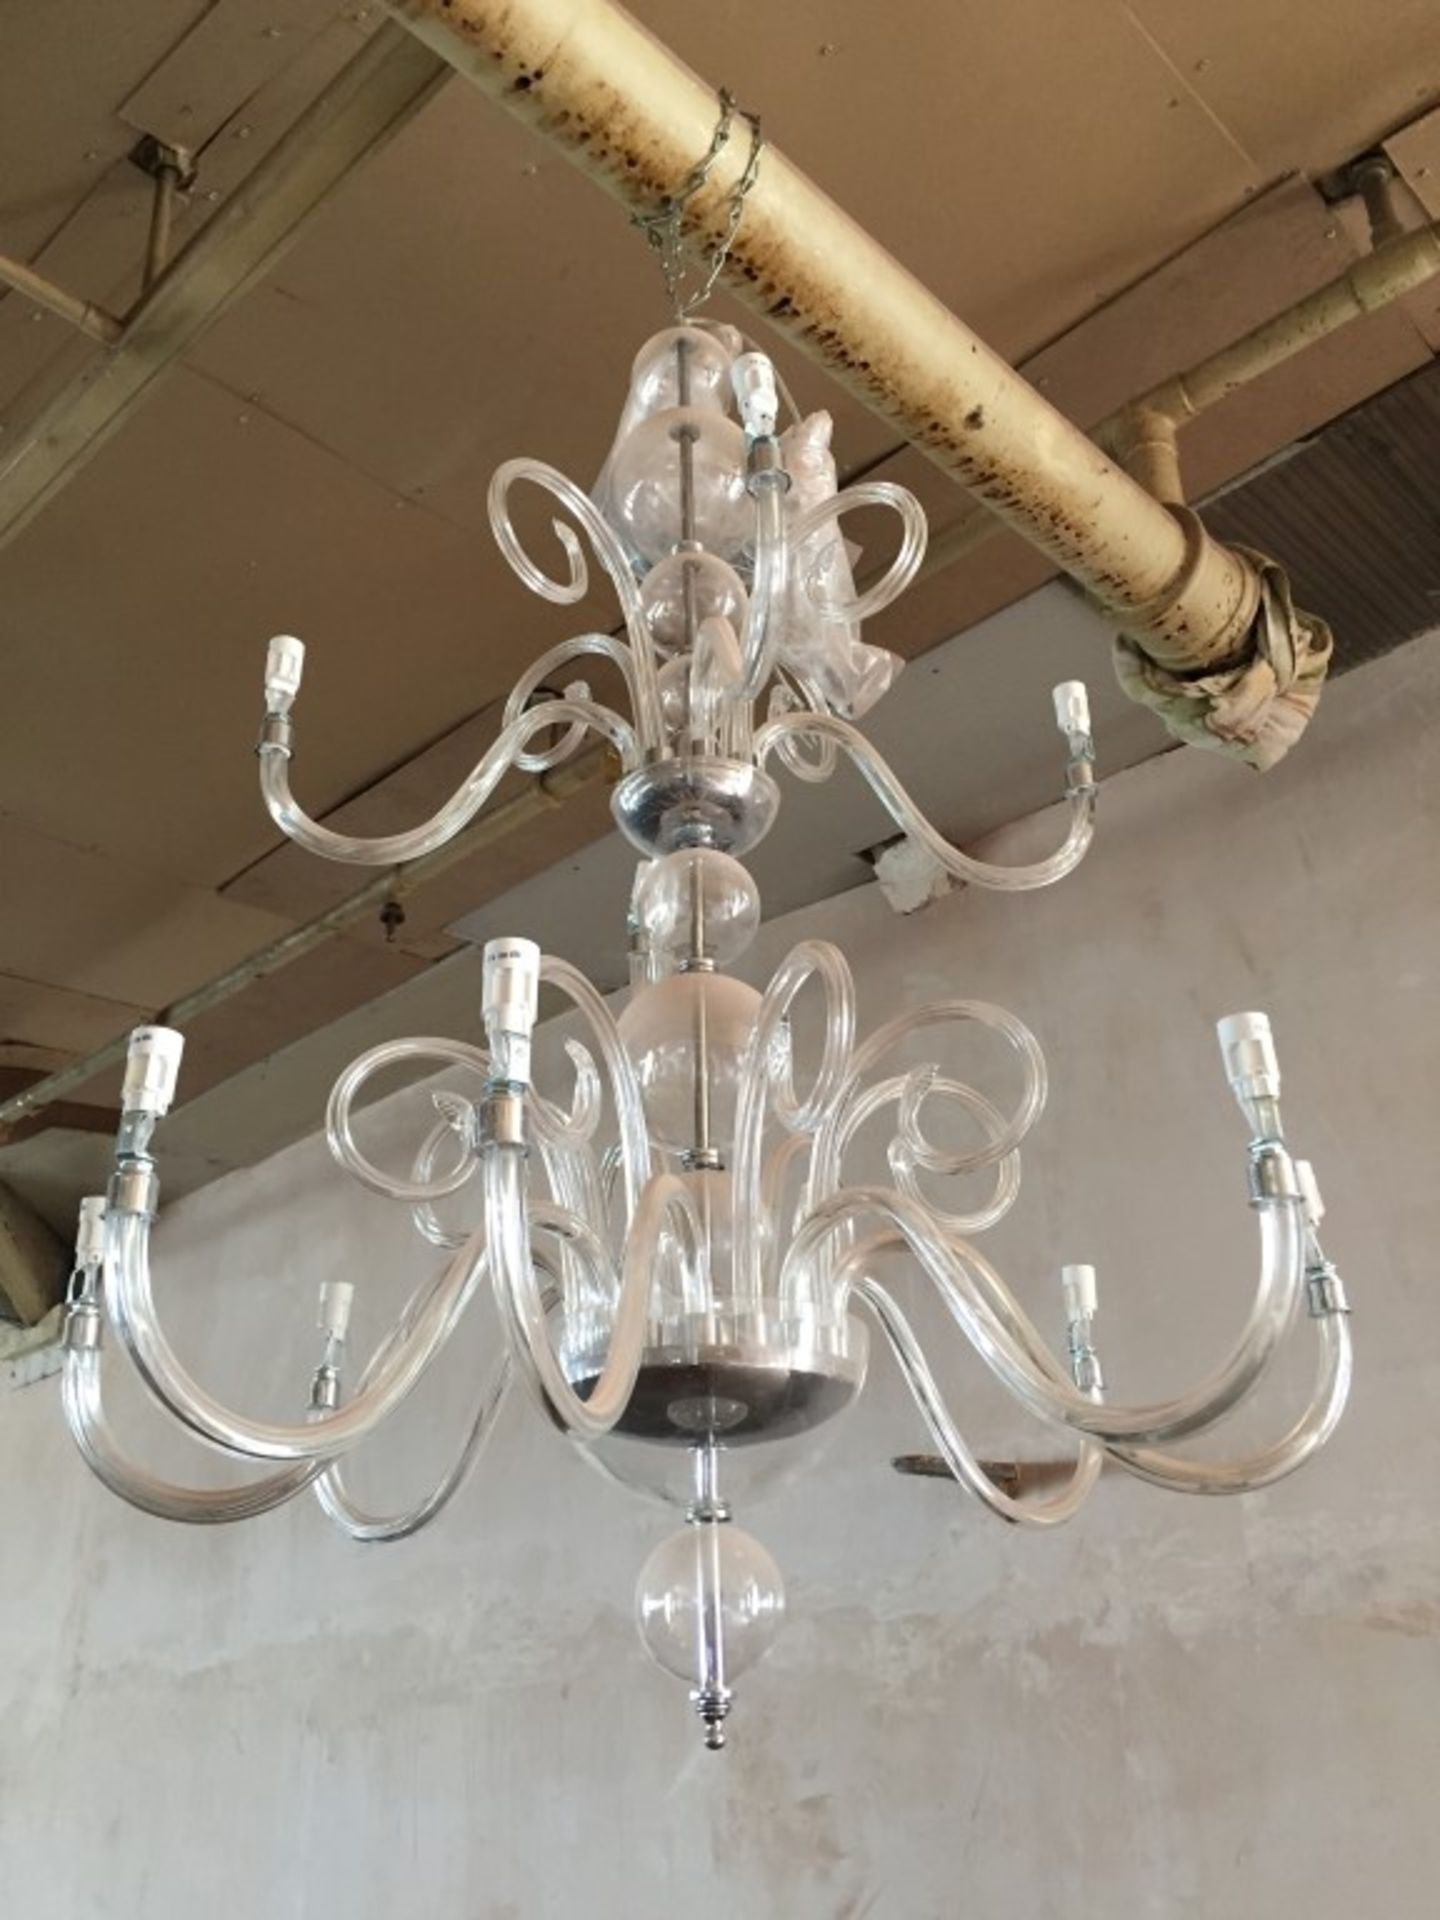 1 x Large, Ornate Chandelier-style Light Fitting - Dimensions To Follow - Ref: NDE084 - CL122 - - Image 4 of 8